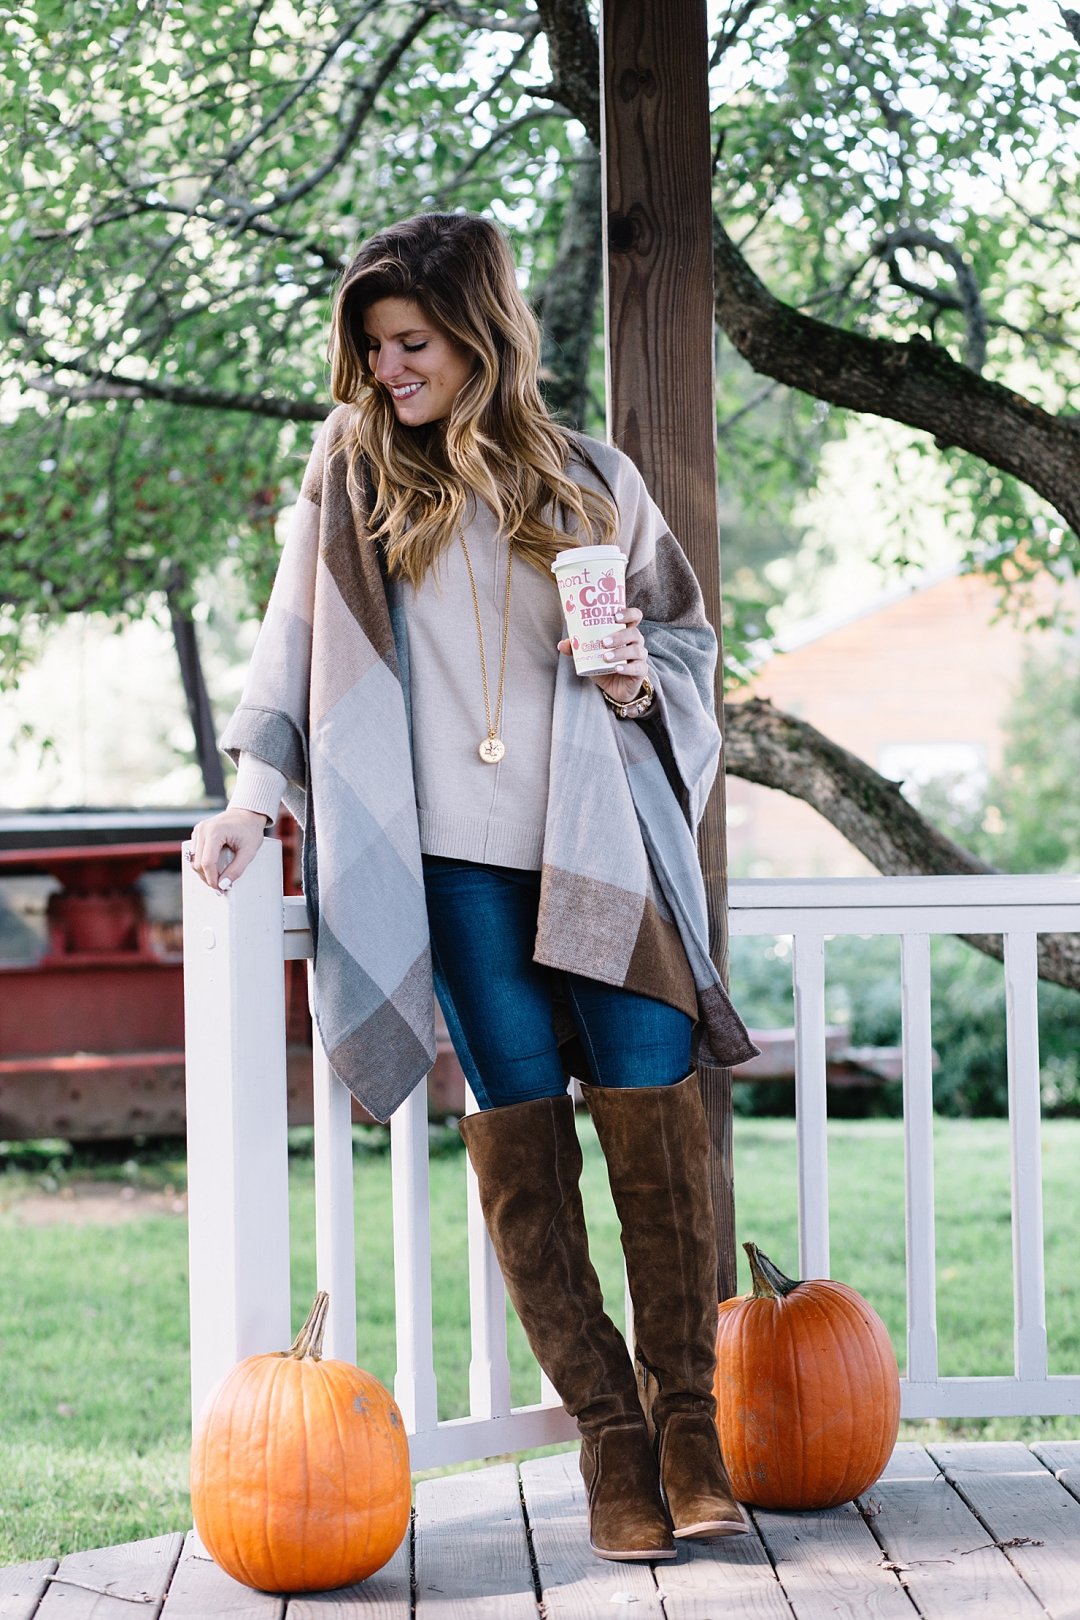 brighton the day at cold hollow cider mill drinking hot apple cider and wearing nordstrom poncho with brown tall boots and jeans for cute fall outfit 